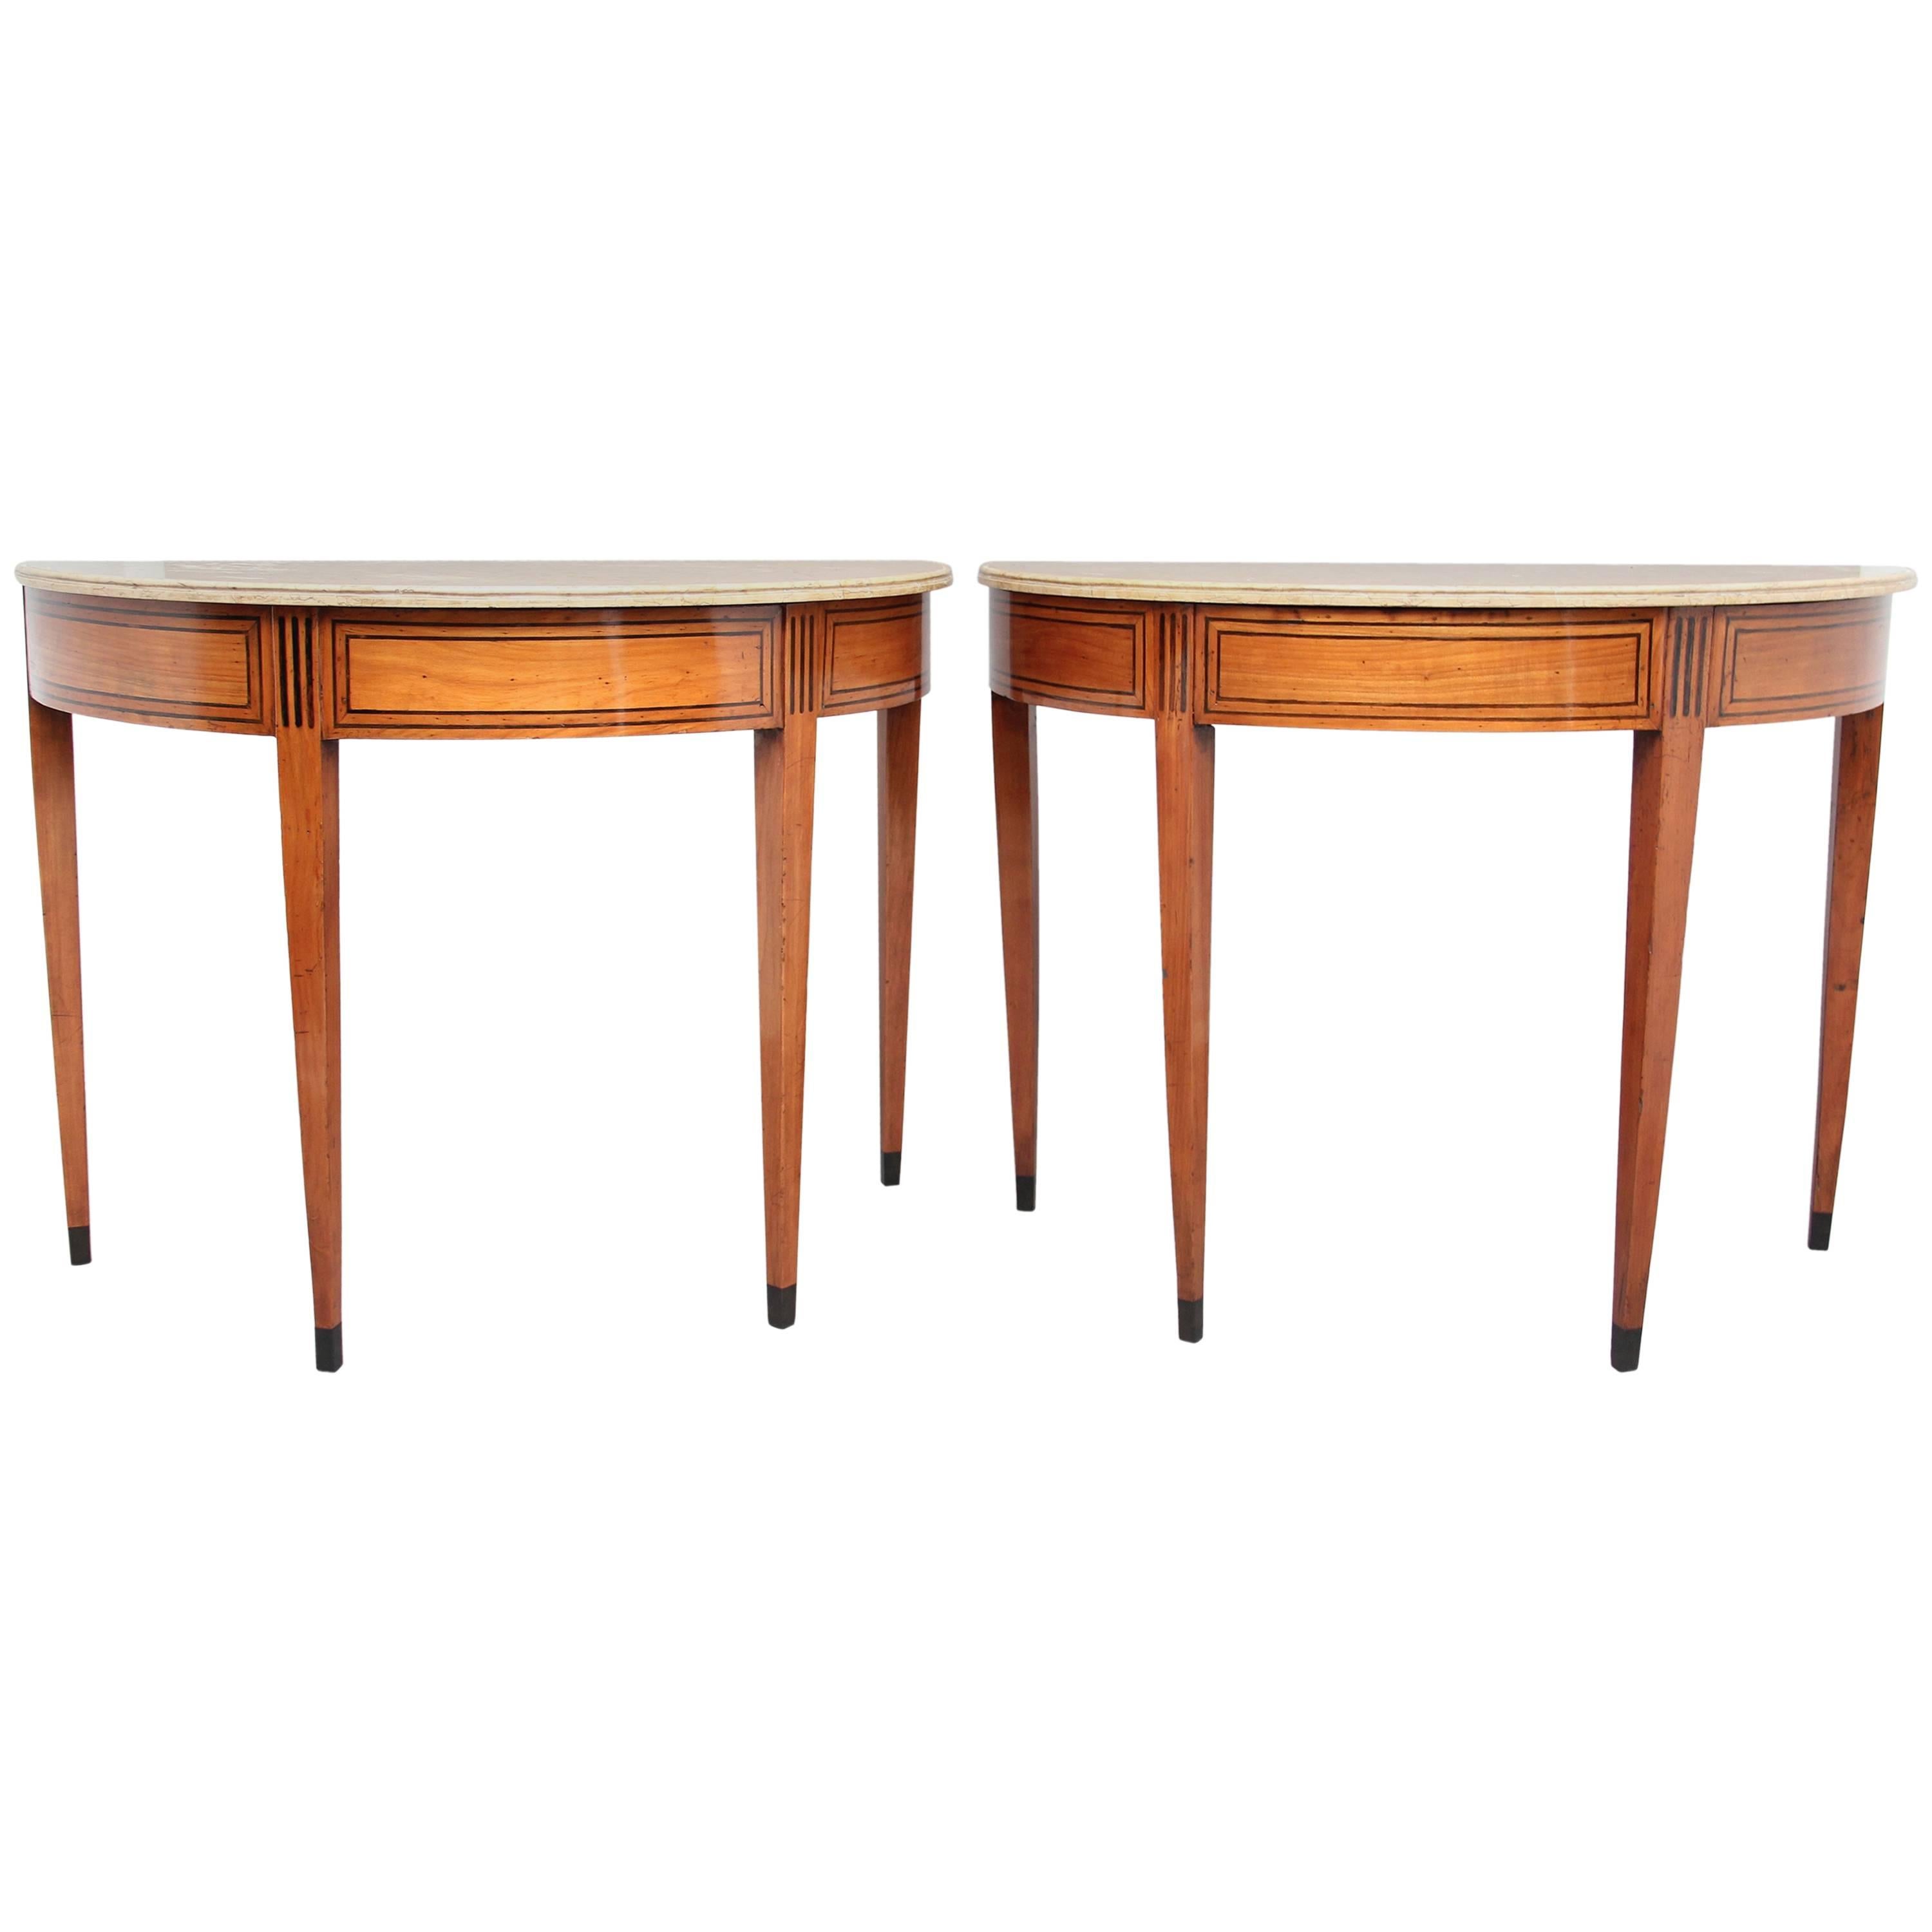 Pair of Early 19th Century Italian Console Tables